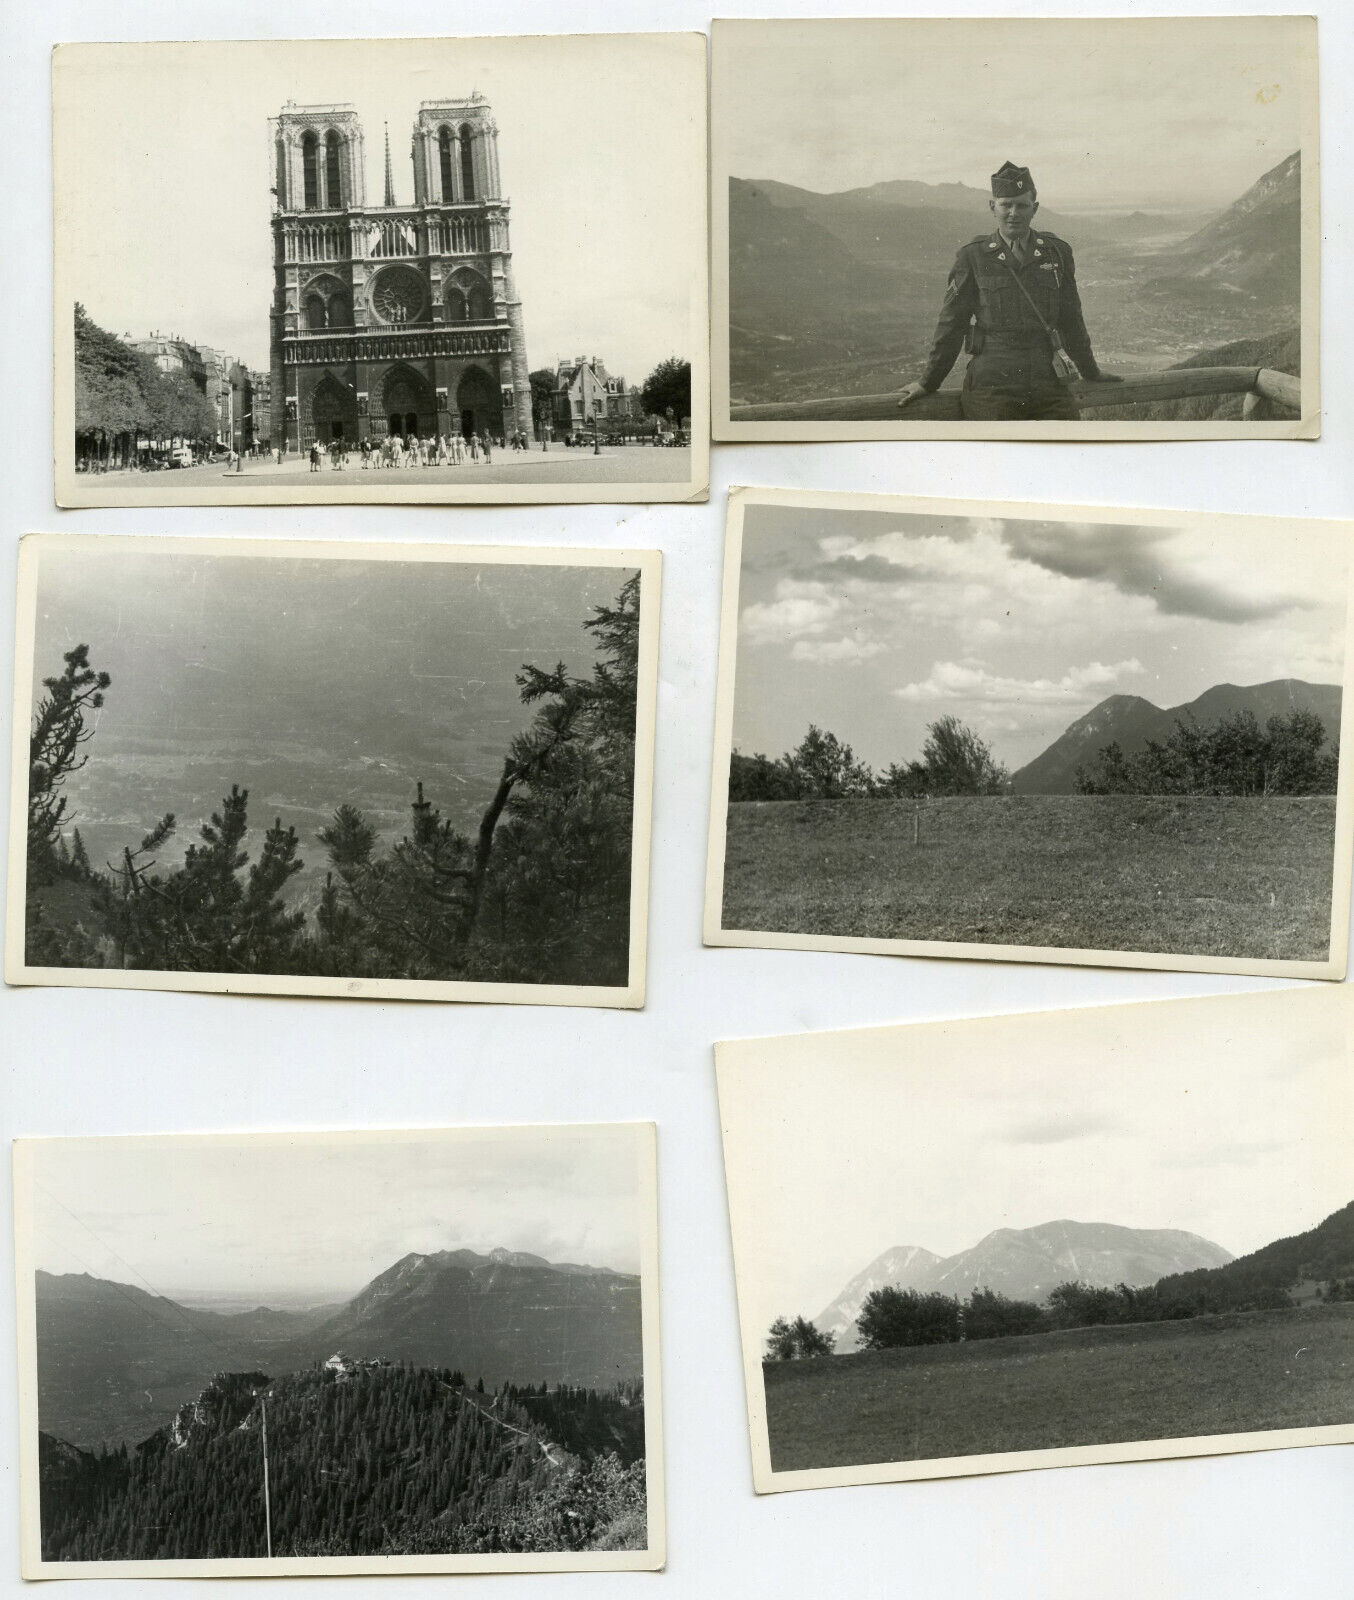 World War 2 Soldier Photos 1940s Germany Europe Historical Scenery WWII Lot B615